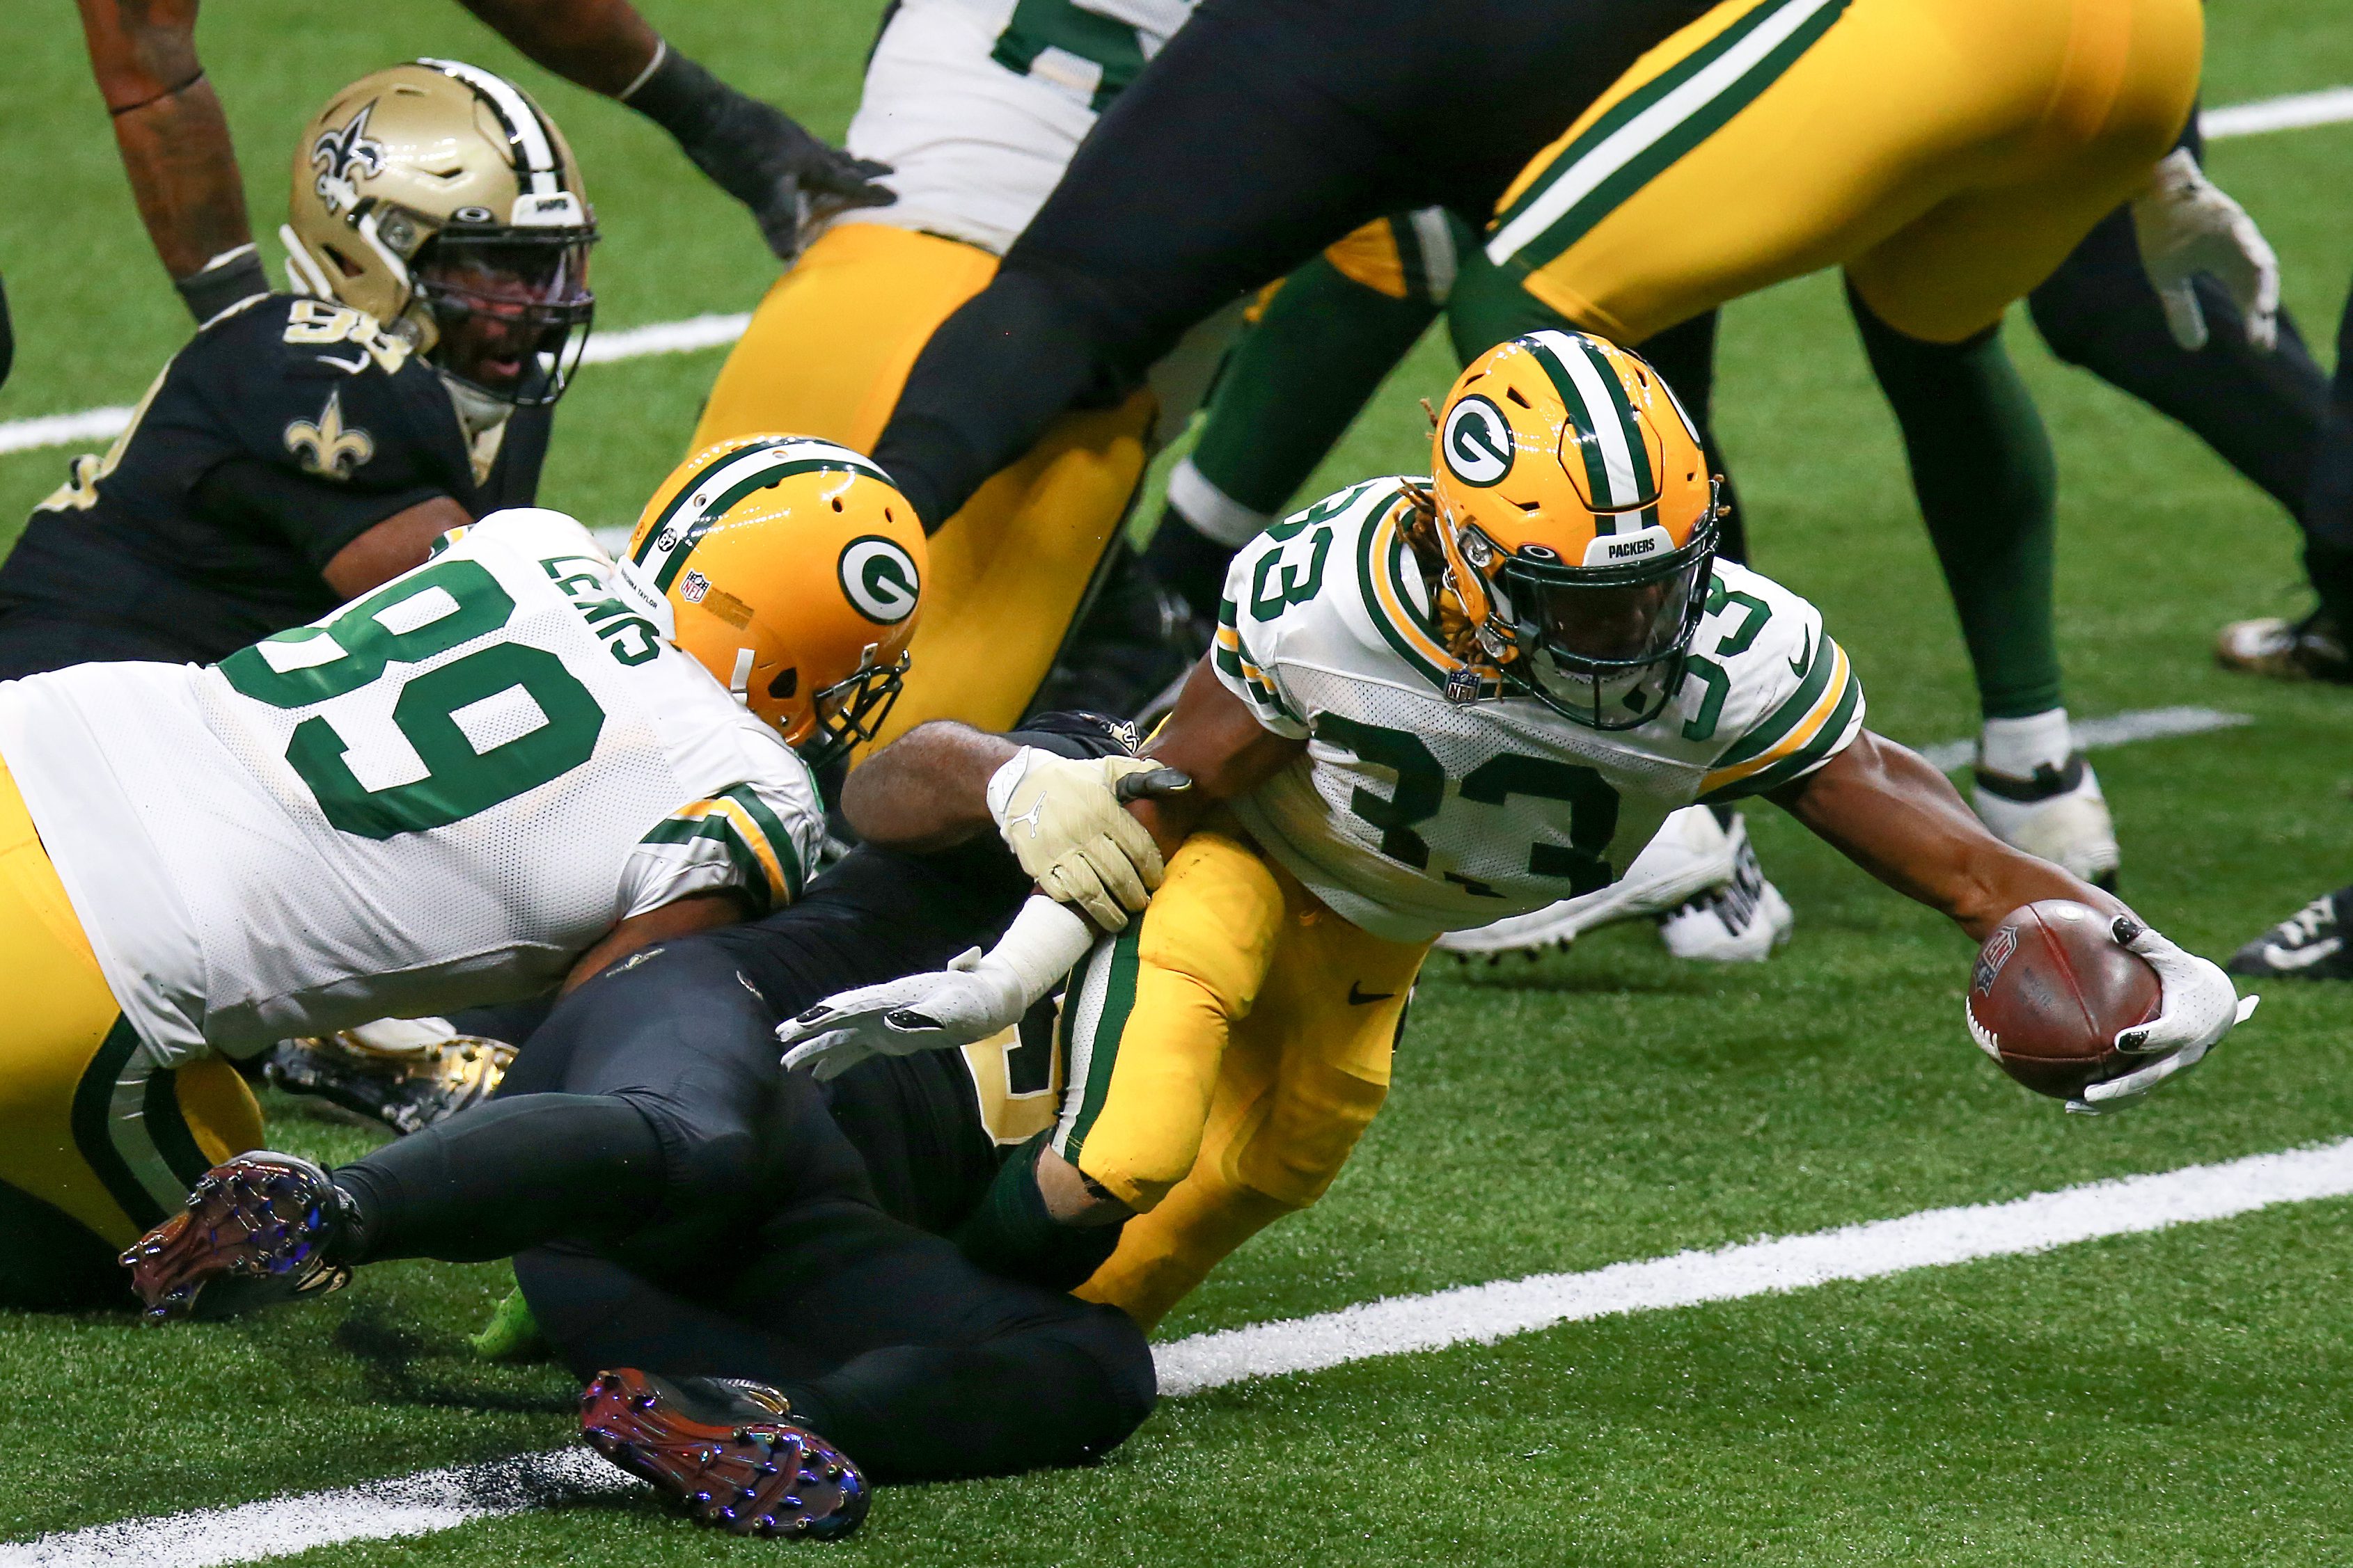 Aaron Jones of the Green Bay Packers scores a TD against the Saints